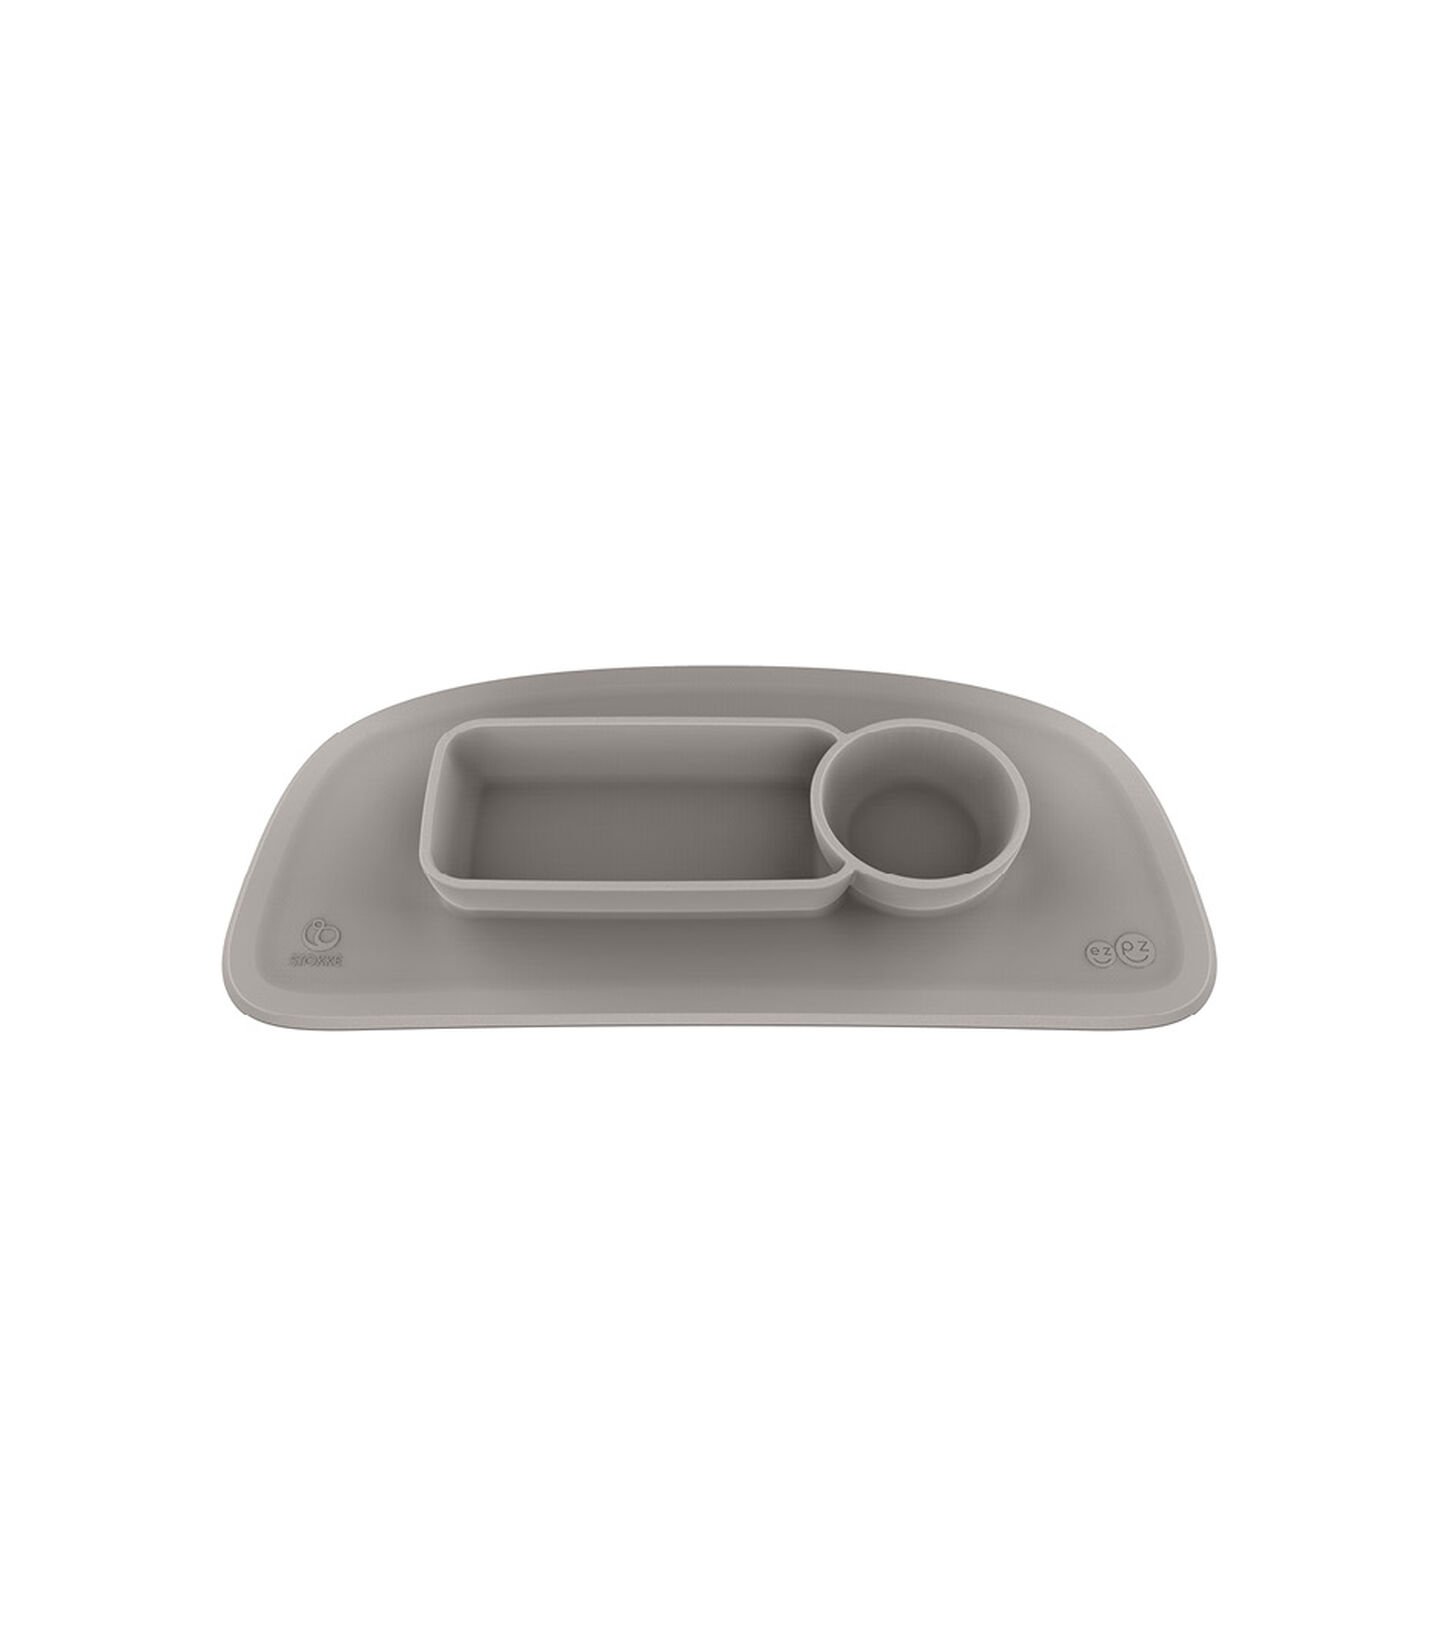 ezpz™ by Stokke™ placemat for Stokke® Tray Soft Grey, Grigio Soft, mainview view 1